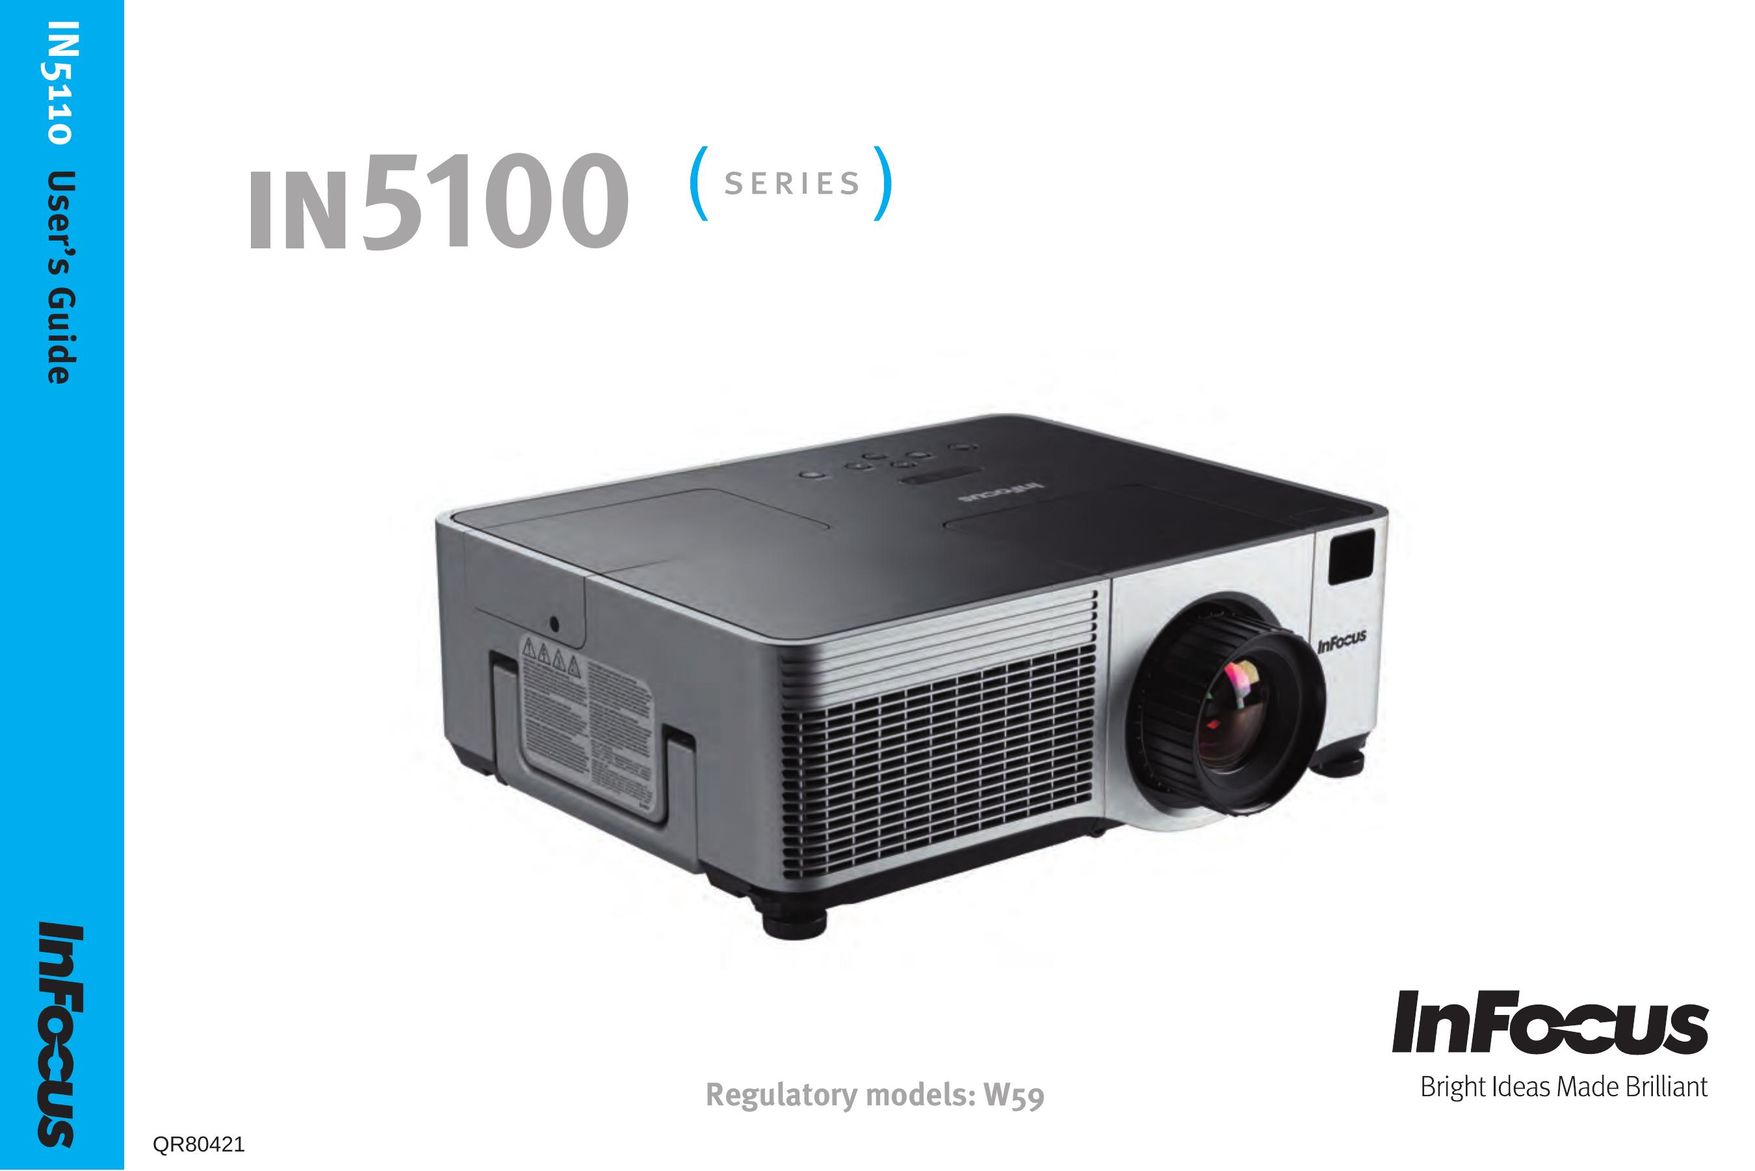 InFocus QR80421 Home Theater System User Manual